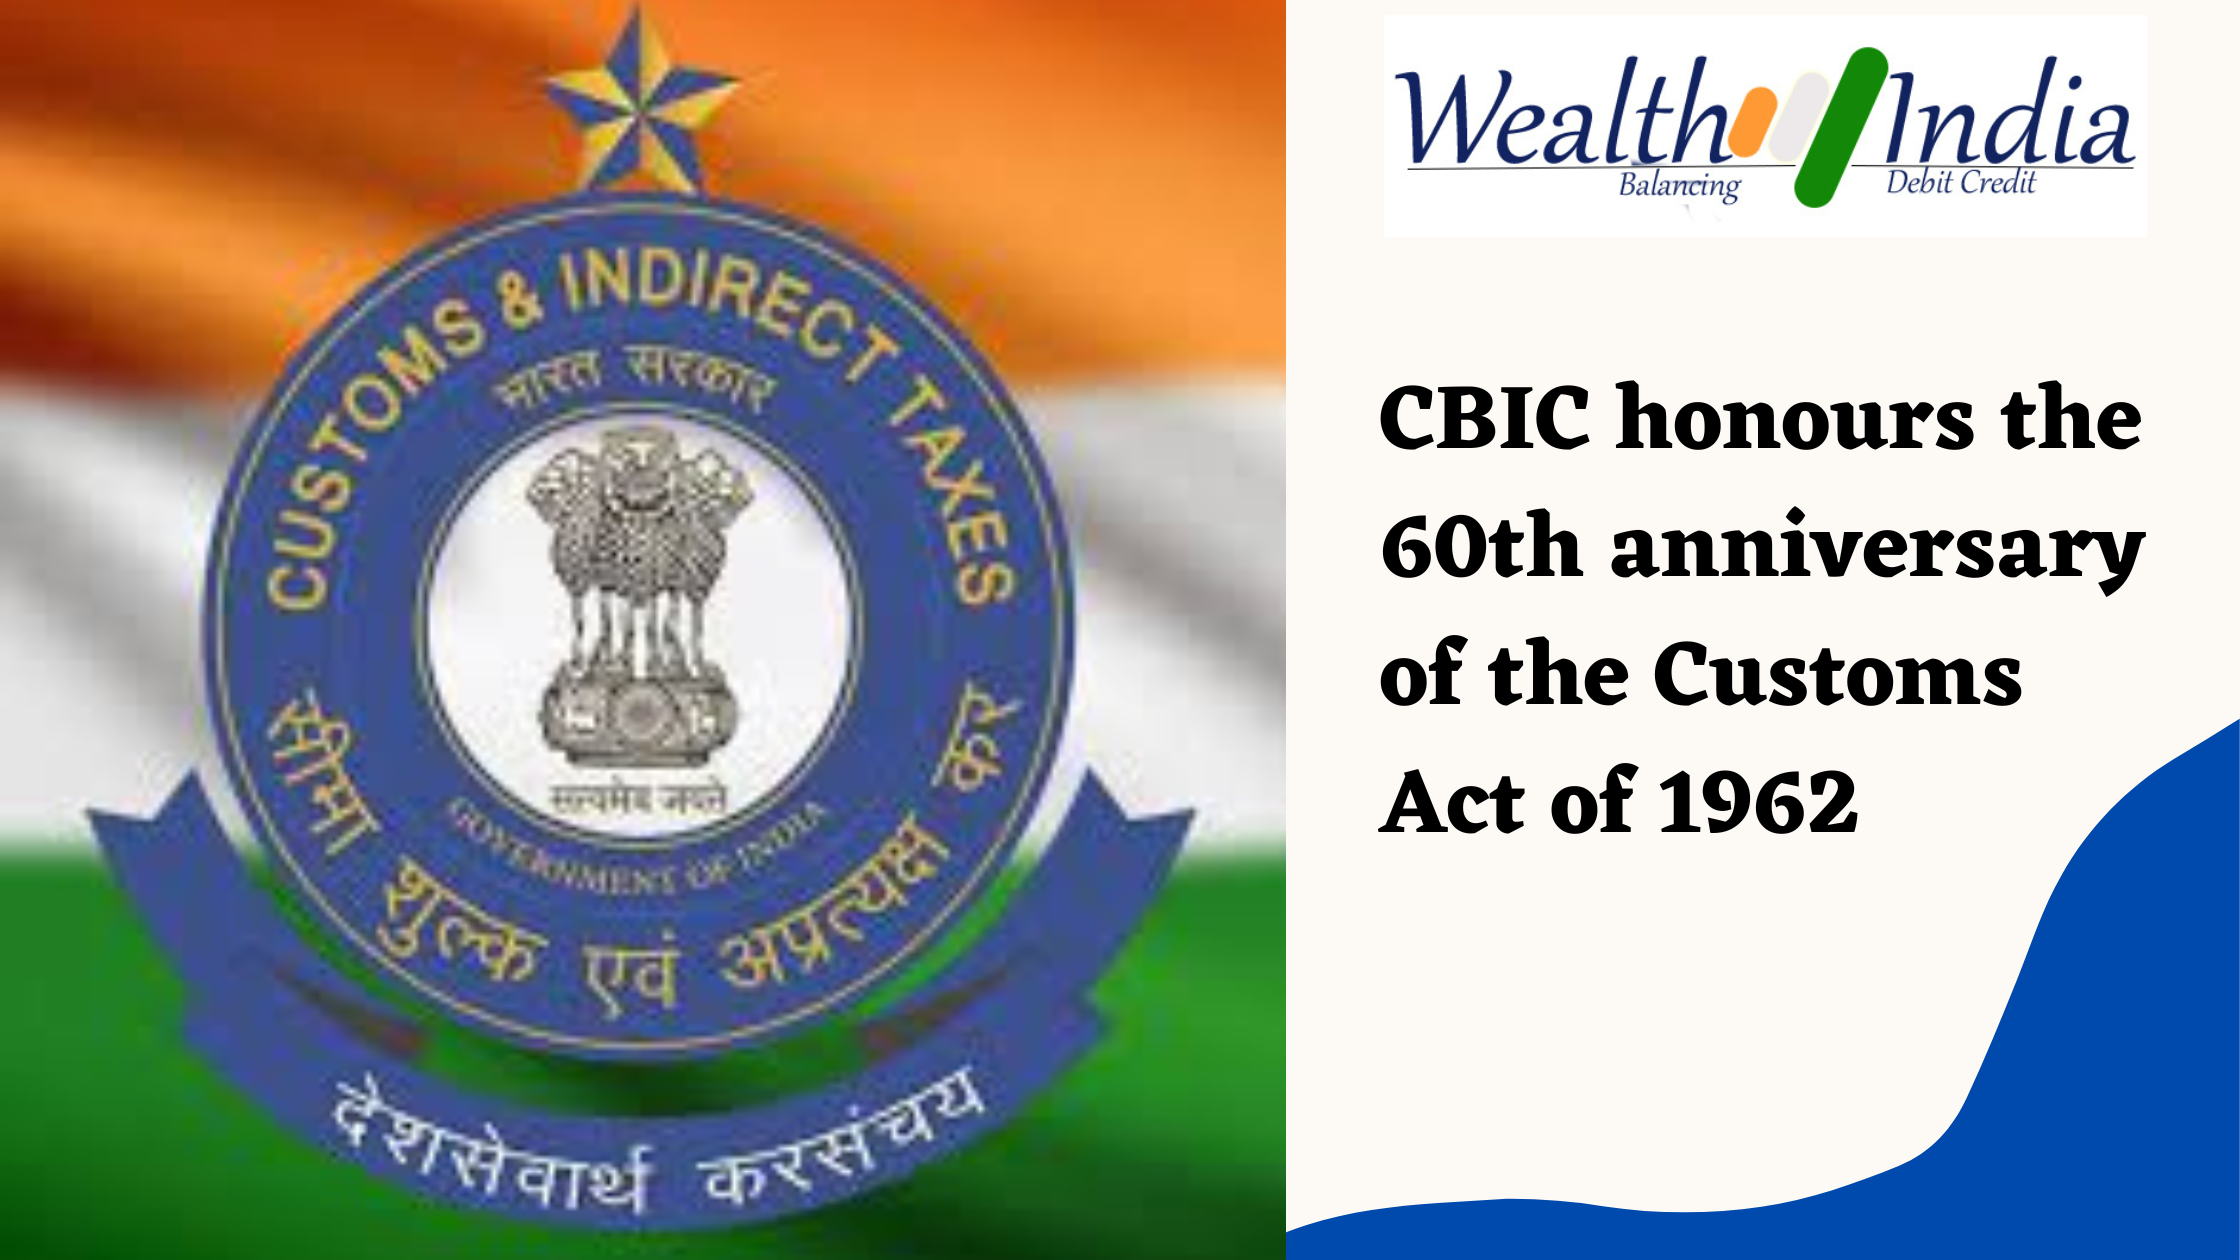 CBIC honours the 60th anniversary of the Customs Act of 1962